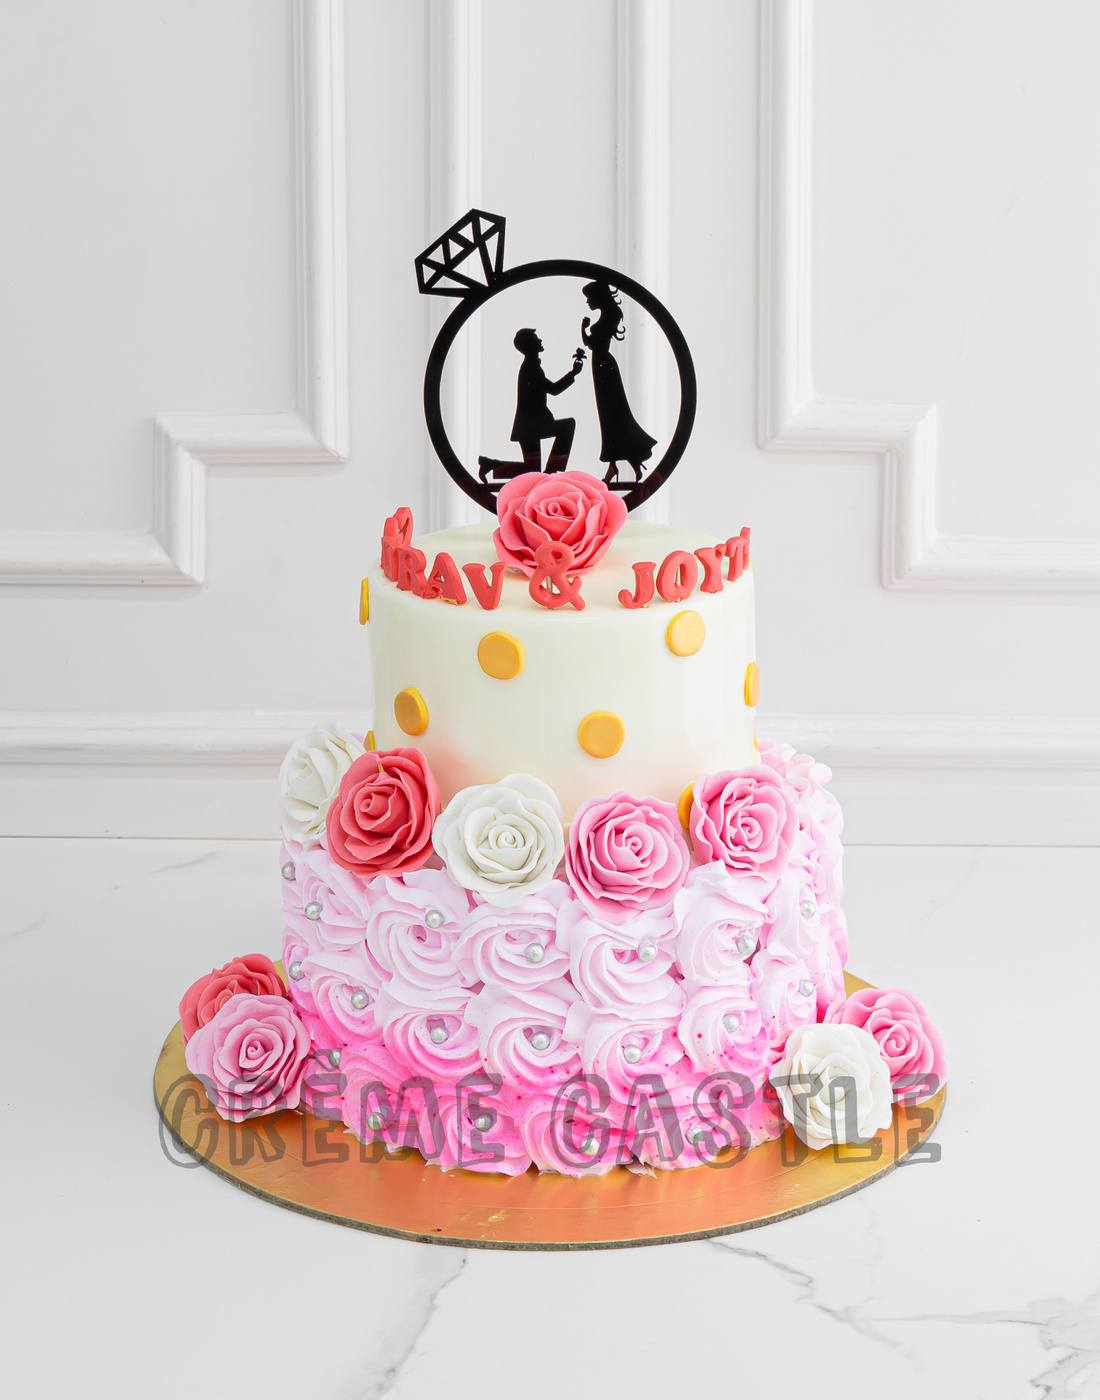 Cake With Engagement Ring Box On Top 5 | Susie cakes, Cake, Heart cake  design